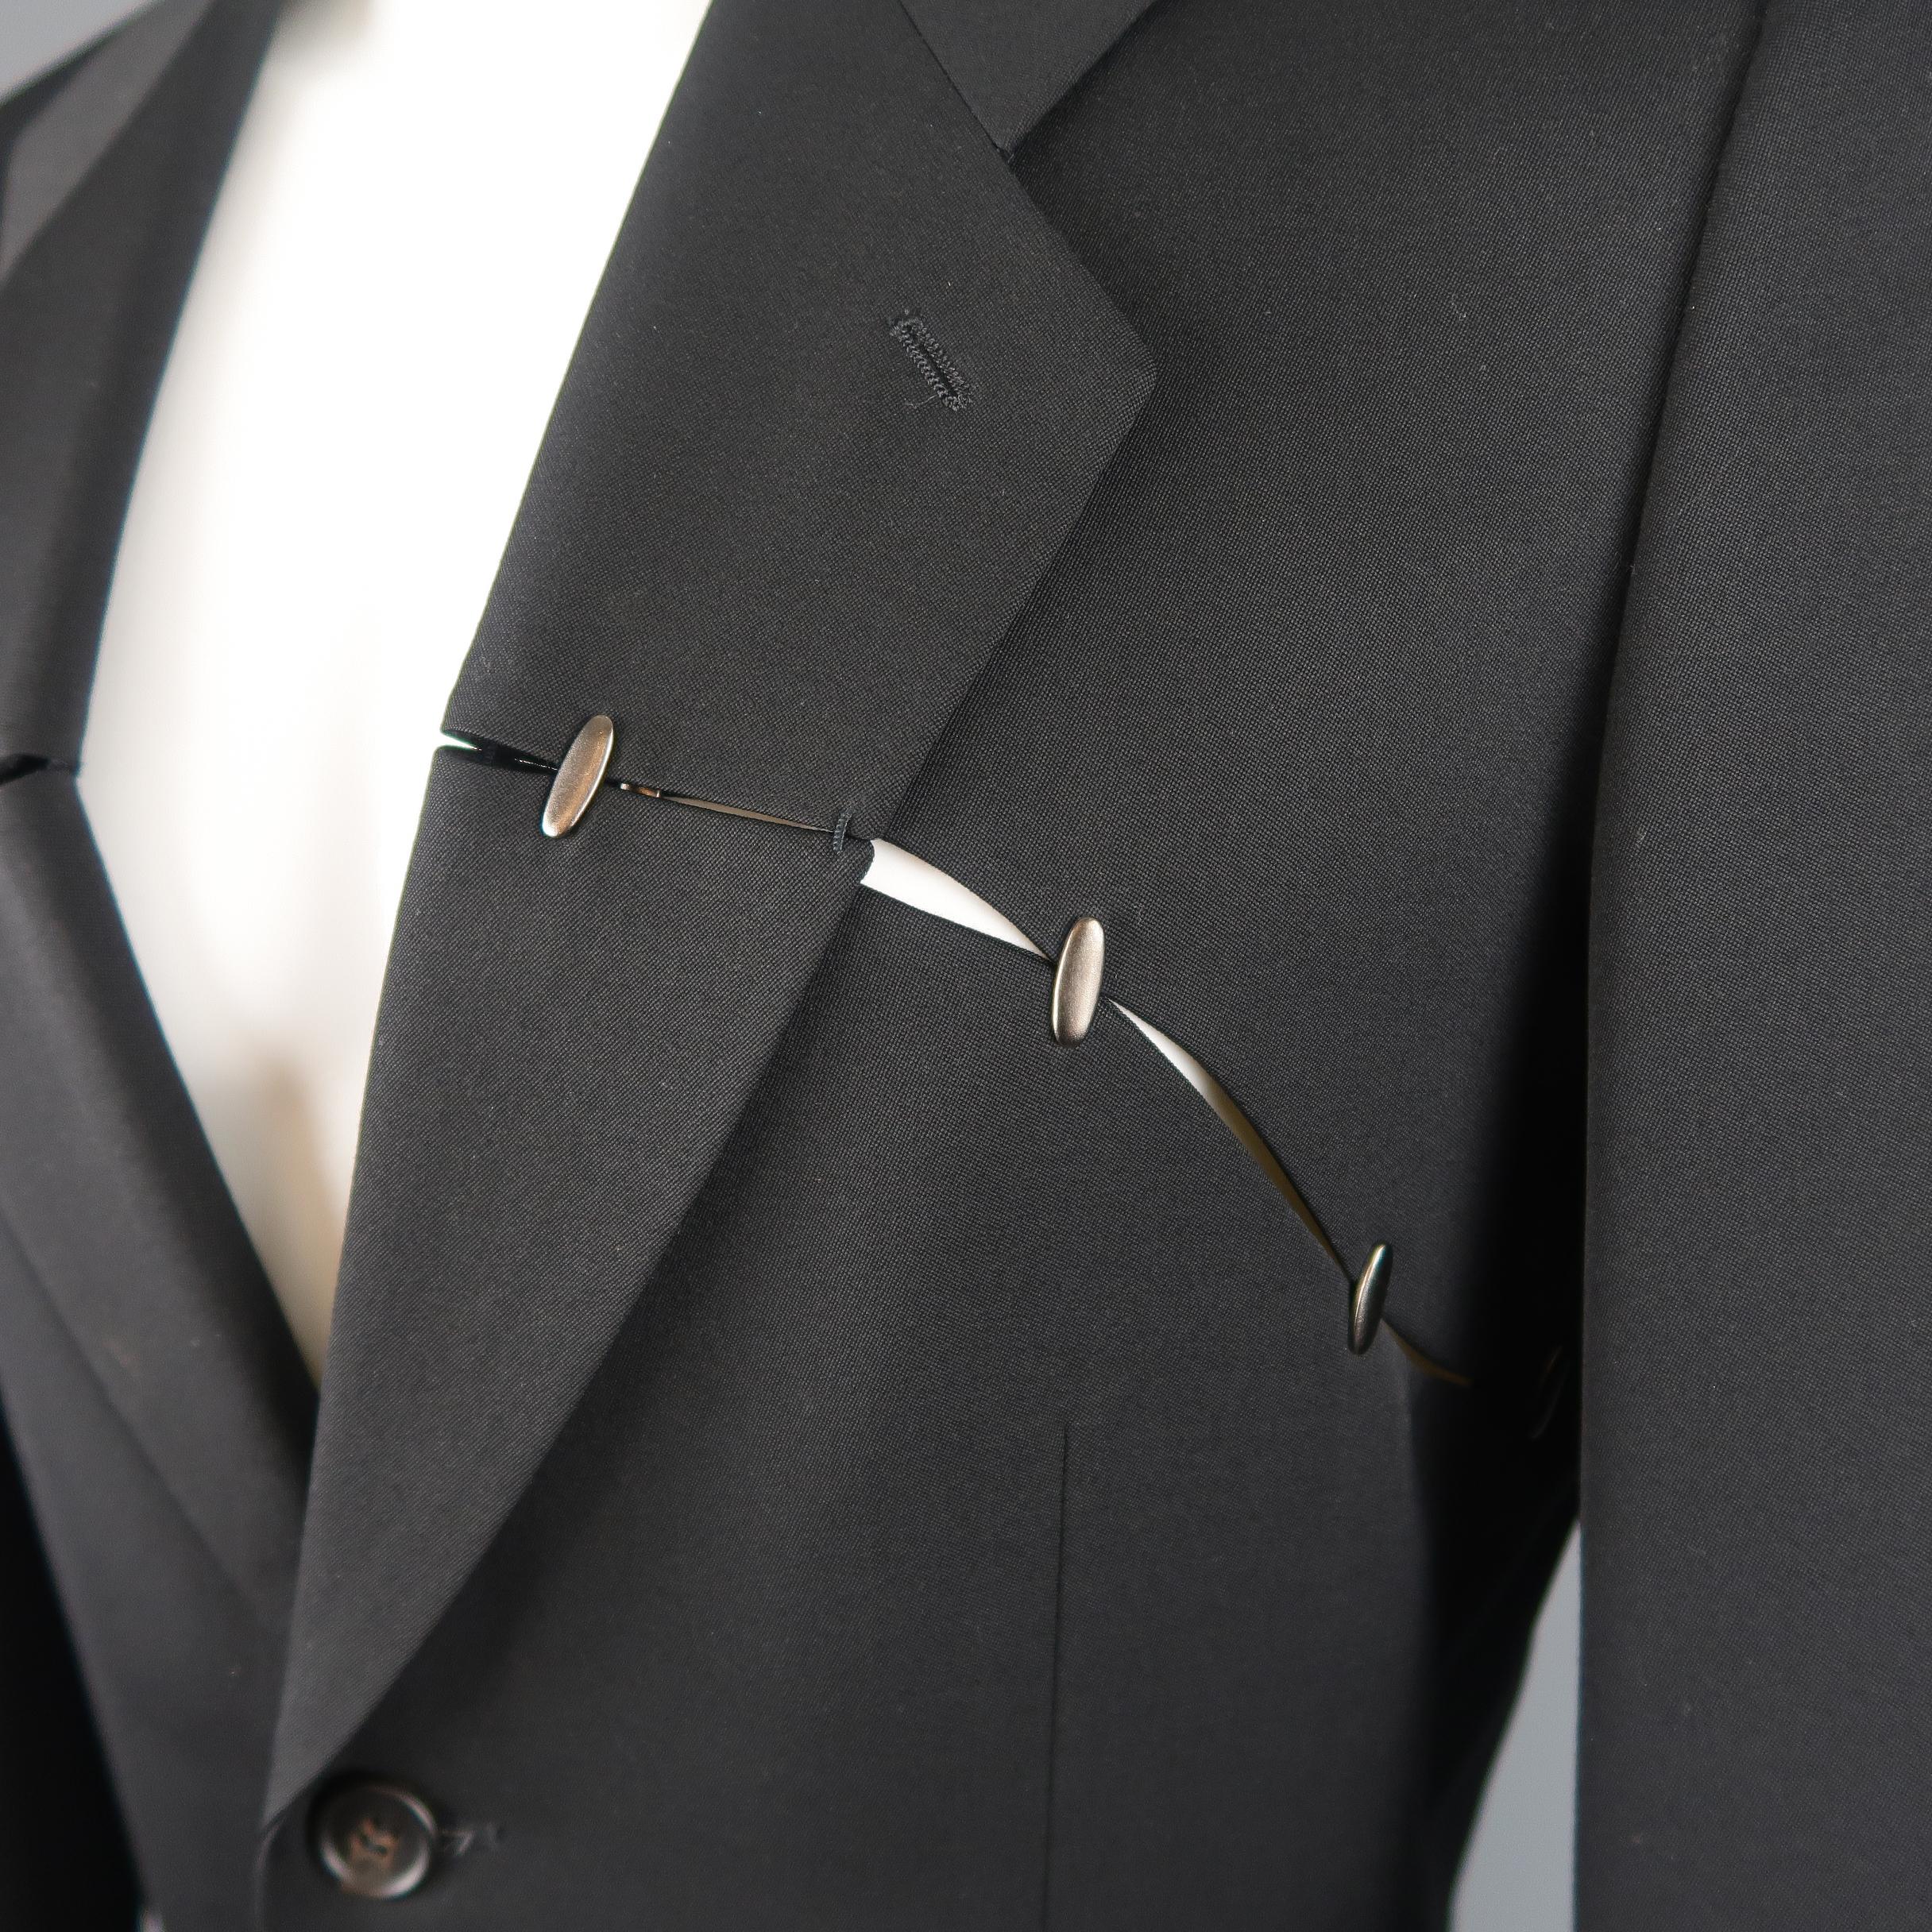 Vintage Single breasted Issey Miyake sport coat jacket comes in black wool with a notch lapel, two button front, and slit cutout panel adorned with silver tone studs. Made in Japan.
 
Good Pre-Owned Condition.
Marked: M
 
Measurements:
 
Shoulder: